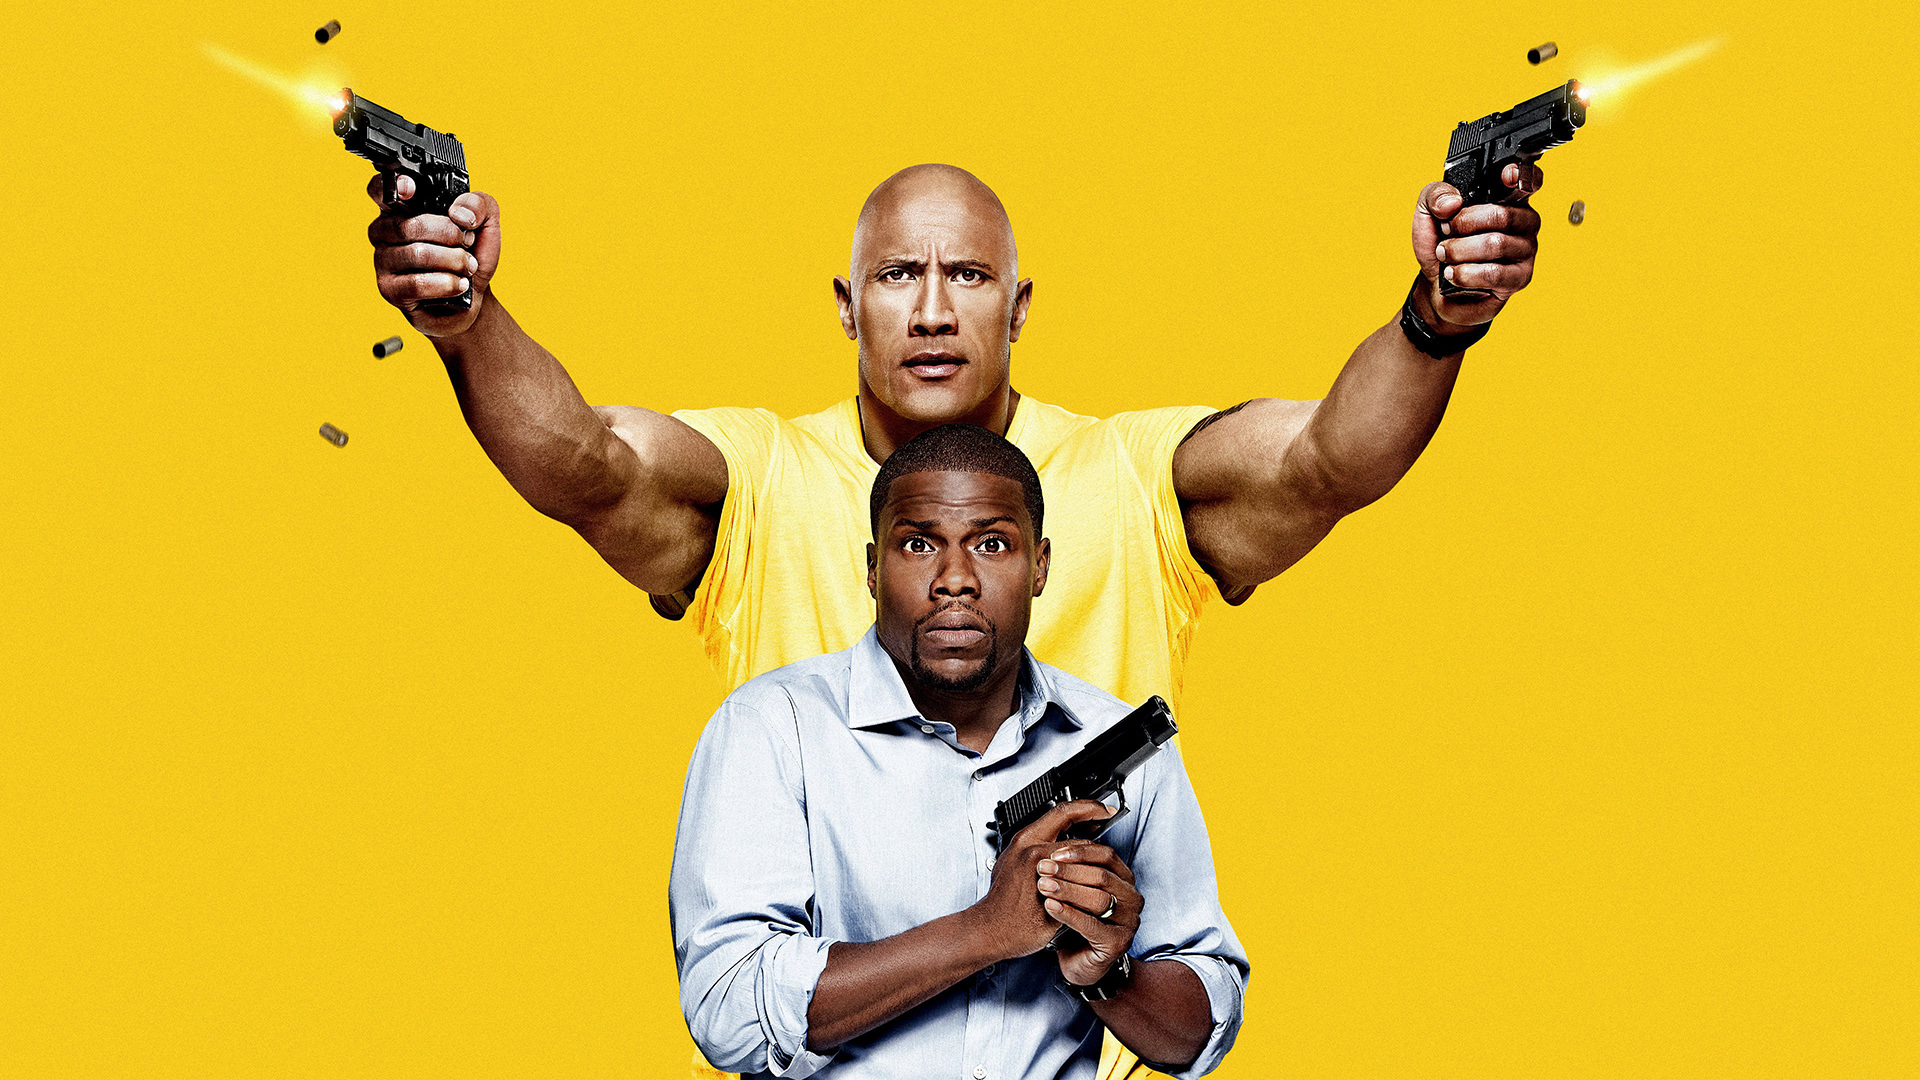 Central Intelligence (2016) - Movie Review / Film Essay